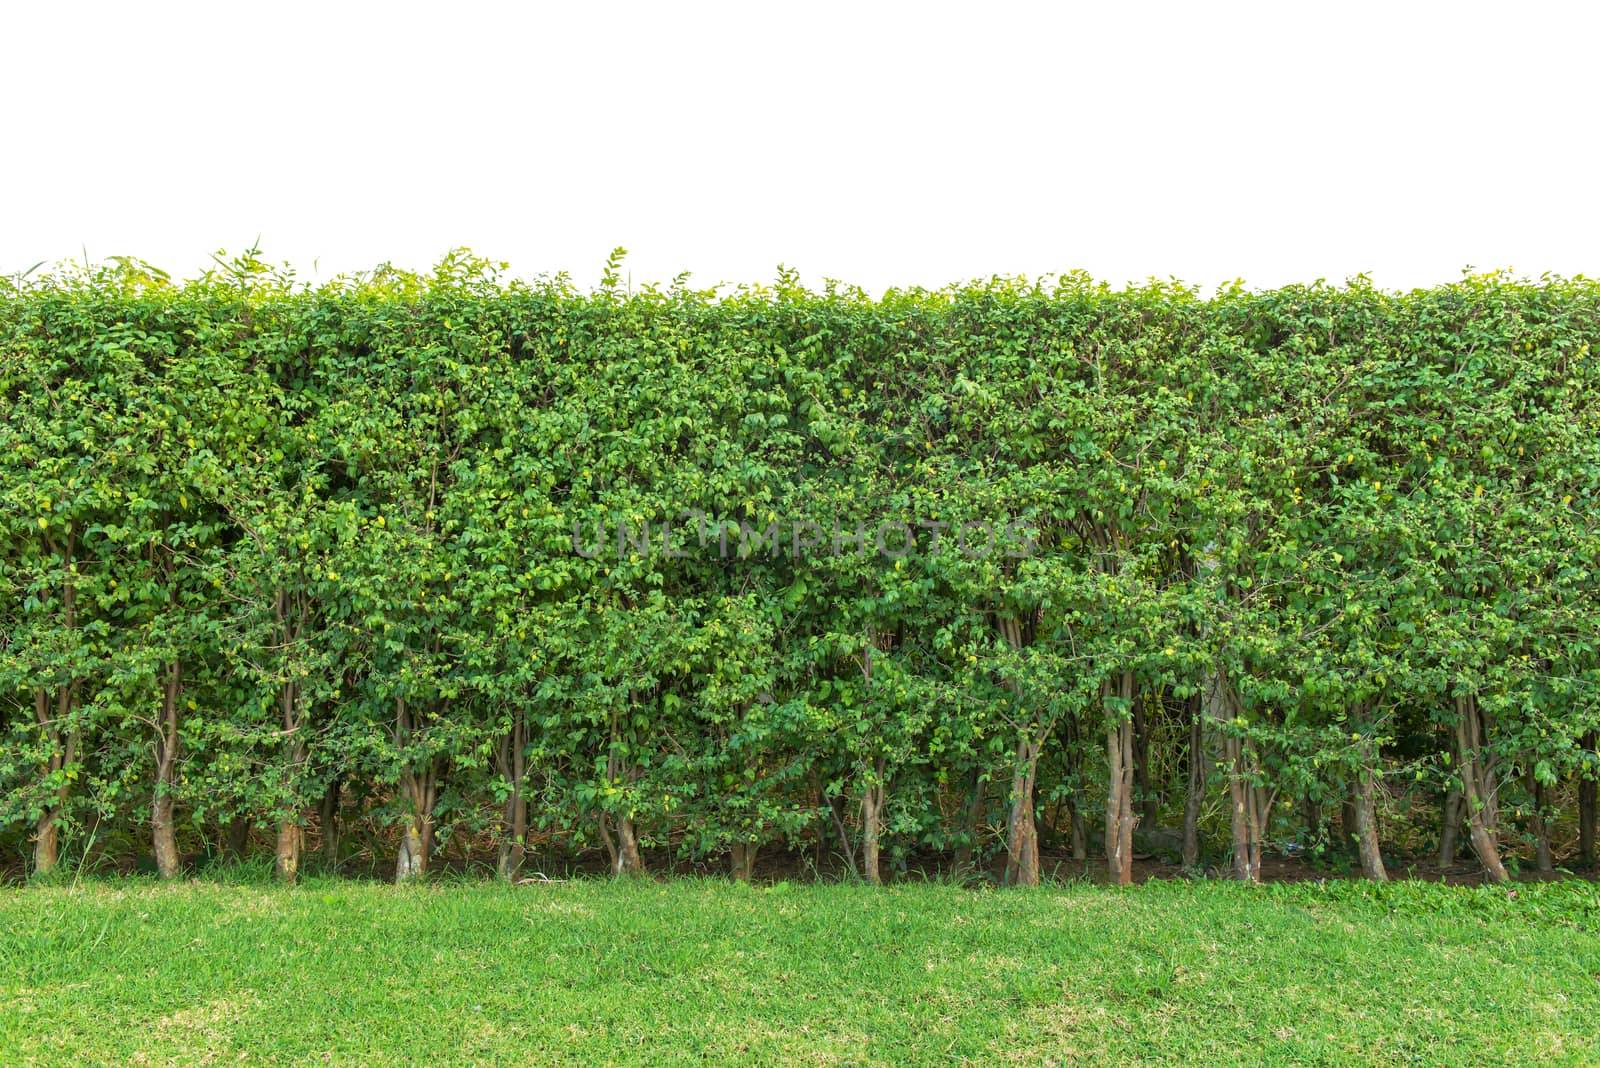 hedge fence or Green Leaves Wall isolated on white background.